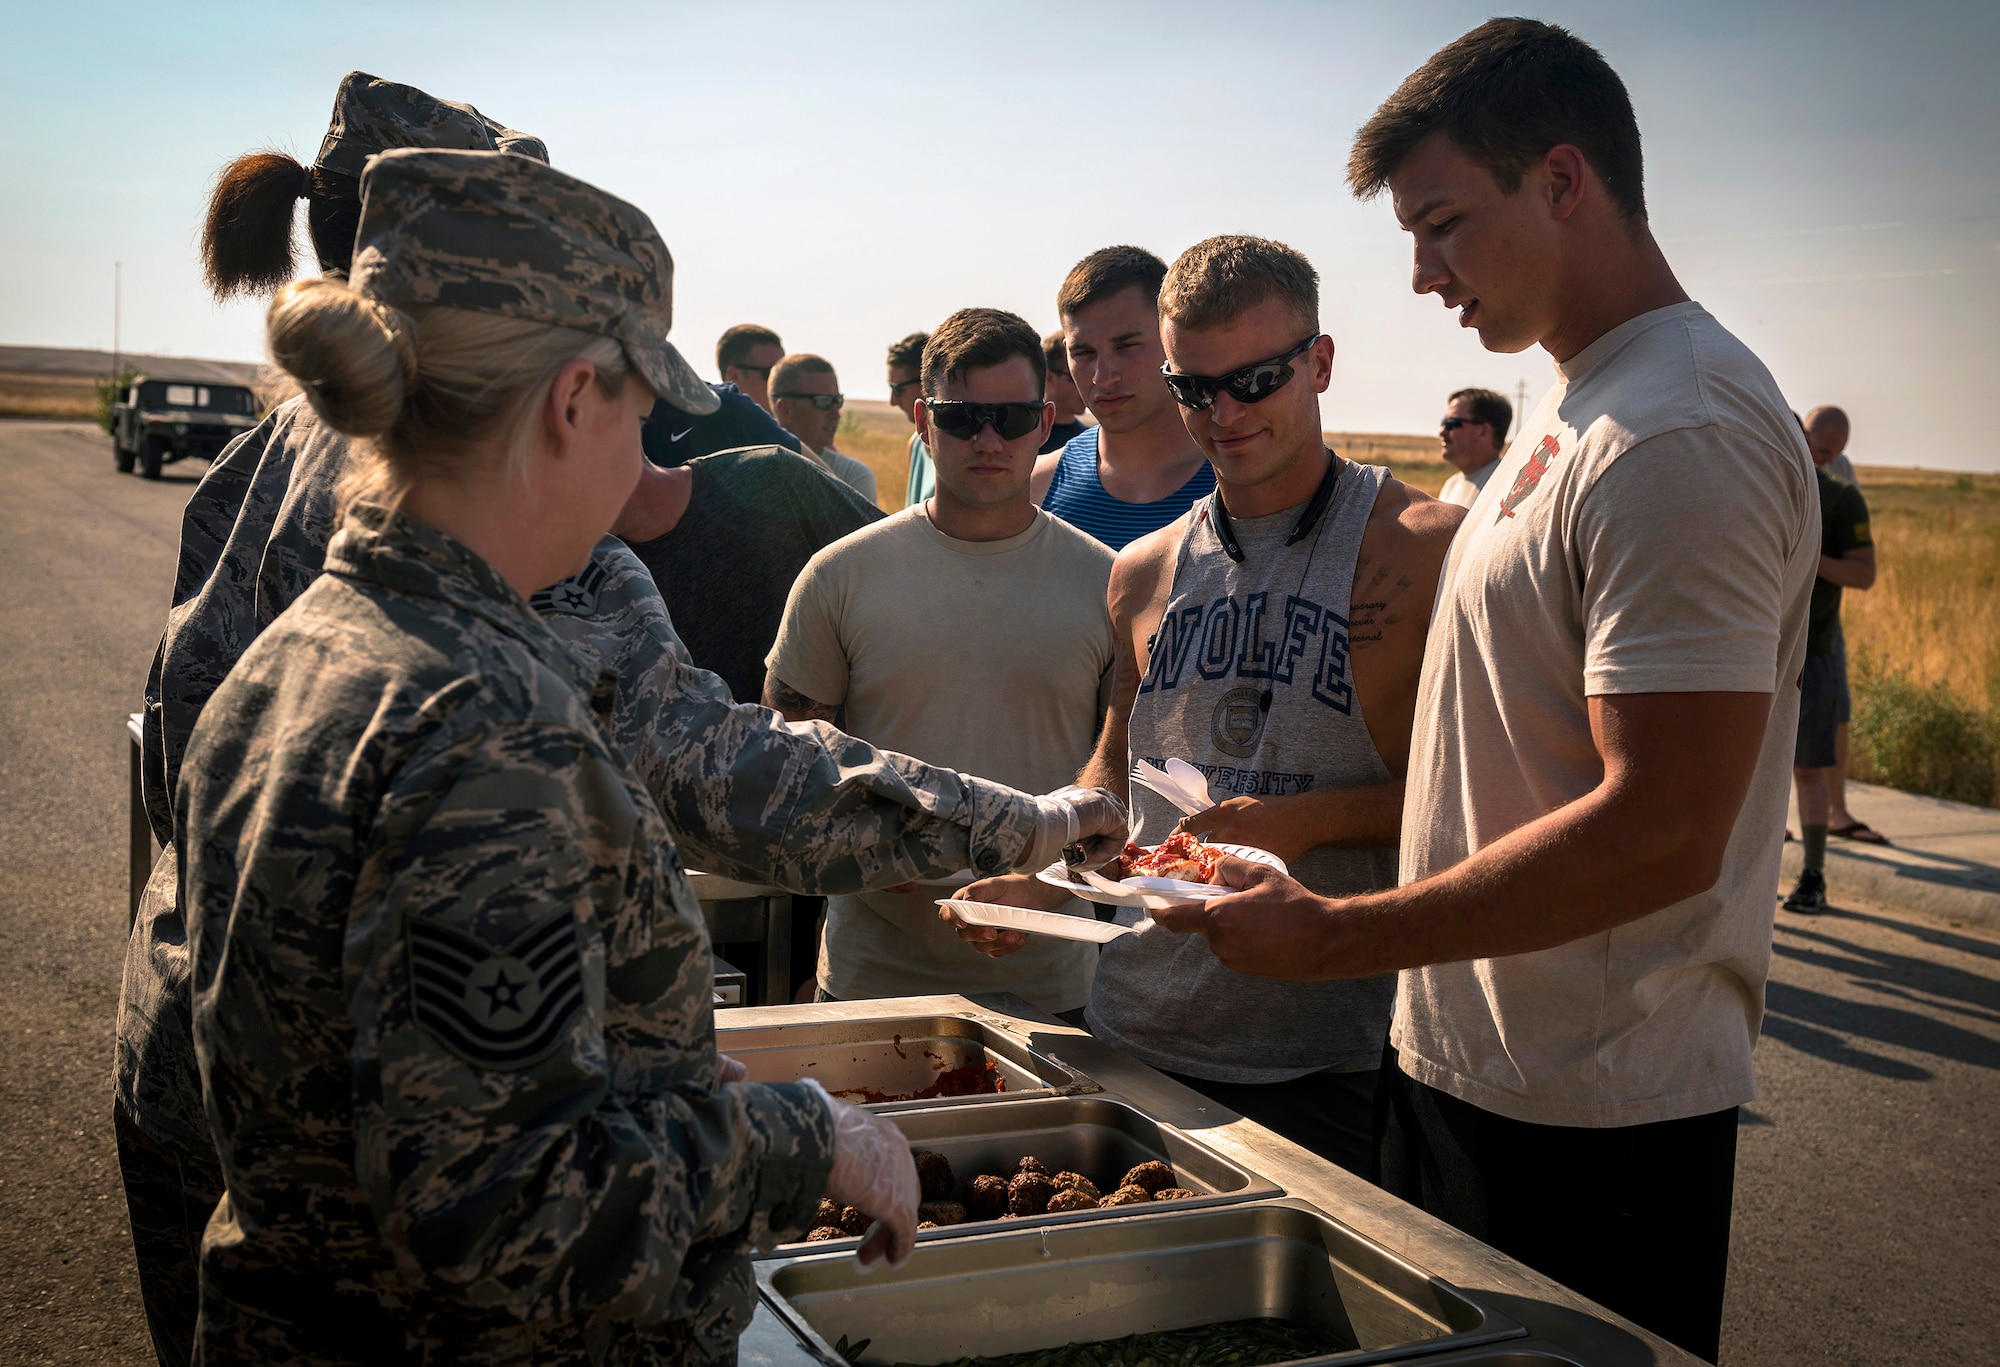 Airmen with the 182nd Civil Engineer Squadron, Illinois Air National Guard, receive dinner in Crow Agency, Mont., Aug. 1, 2017. Force Support Squadron services specialists provided meal support to the unit members while they built veterans’ homes for the Innovative Readiness Training program. (U.S. Air National Guard photo by Tech. Sgt. Lealan Buehrer)